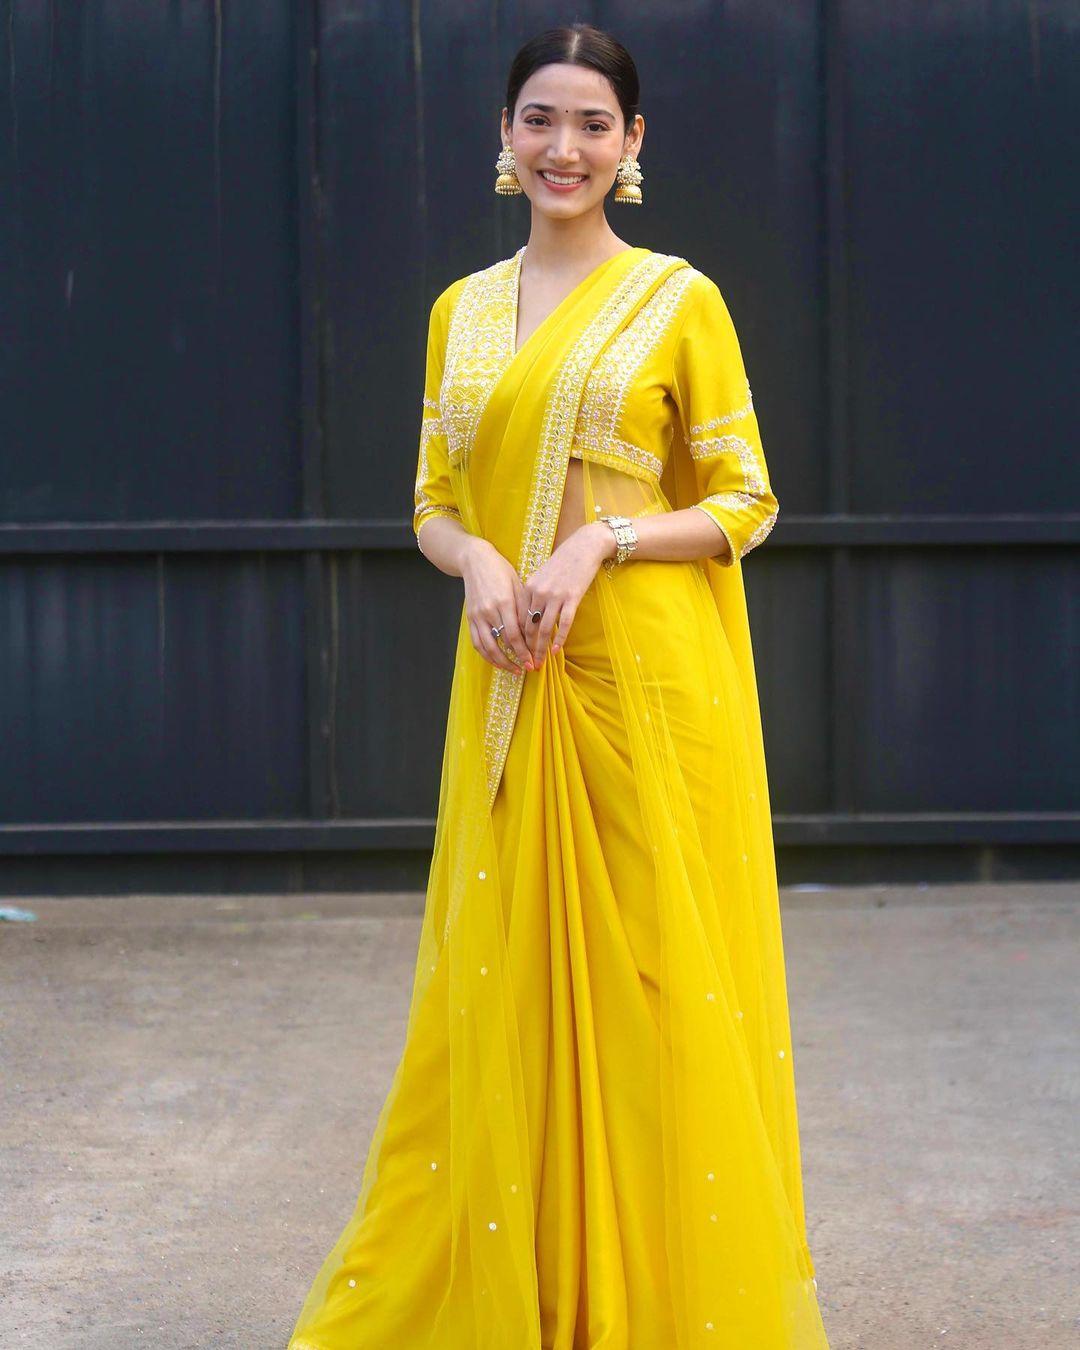 With a flair for sarees, Medha dons a lovely yellow saree with intricate white embroidery